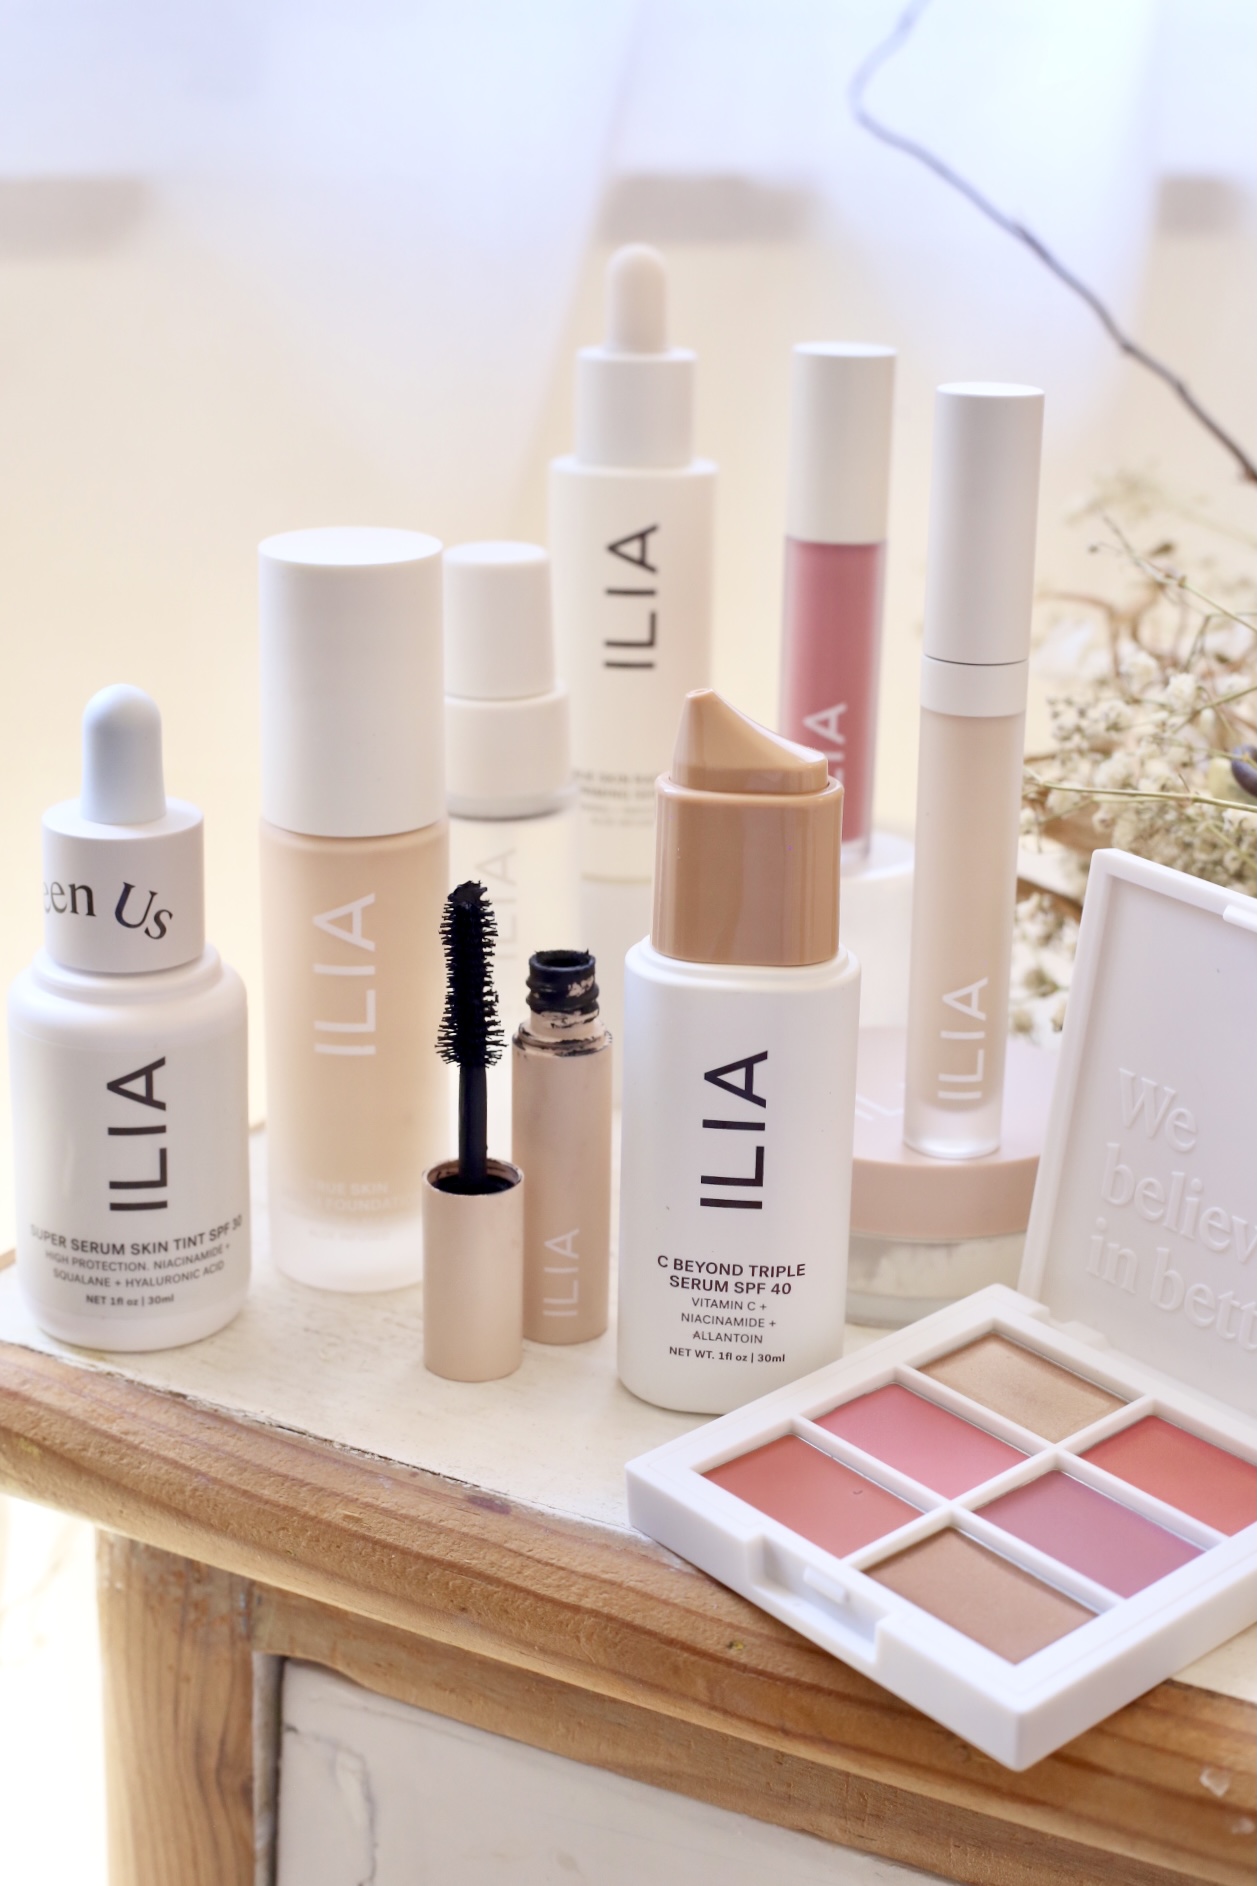 My Brutally Honest ILIA Beauty Review (what I liked and didn’t like)